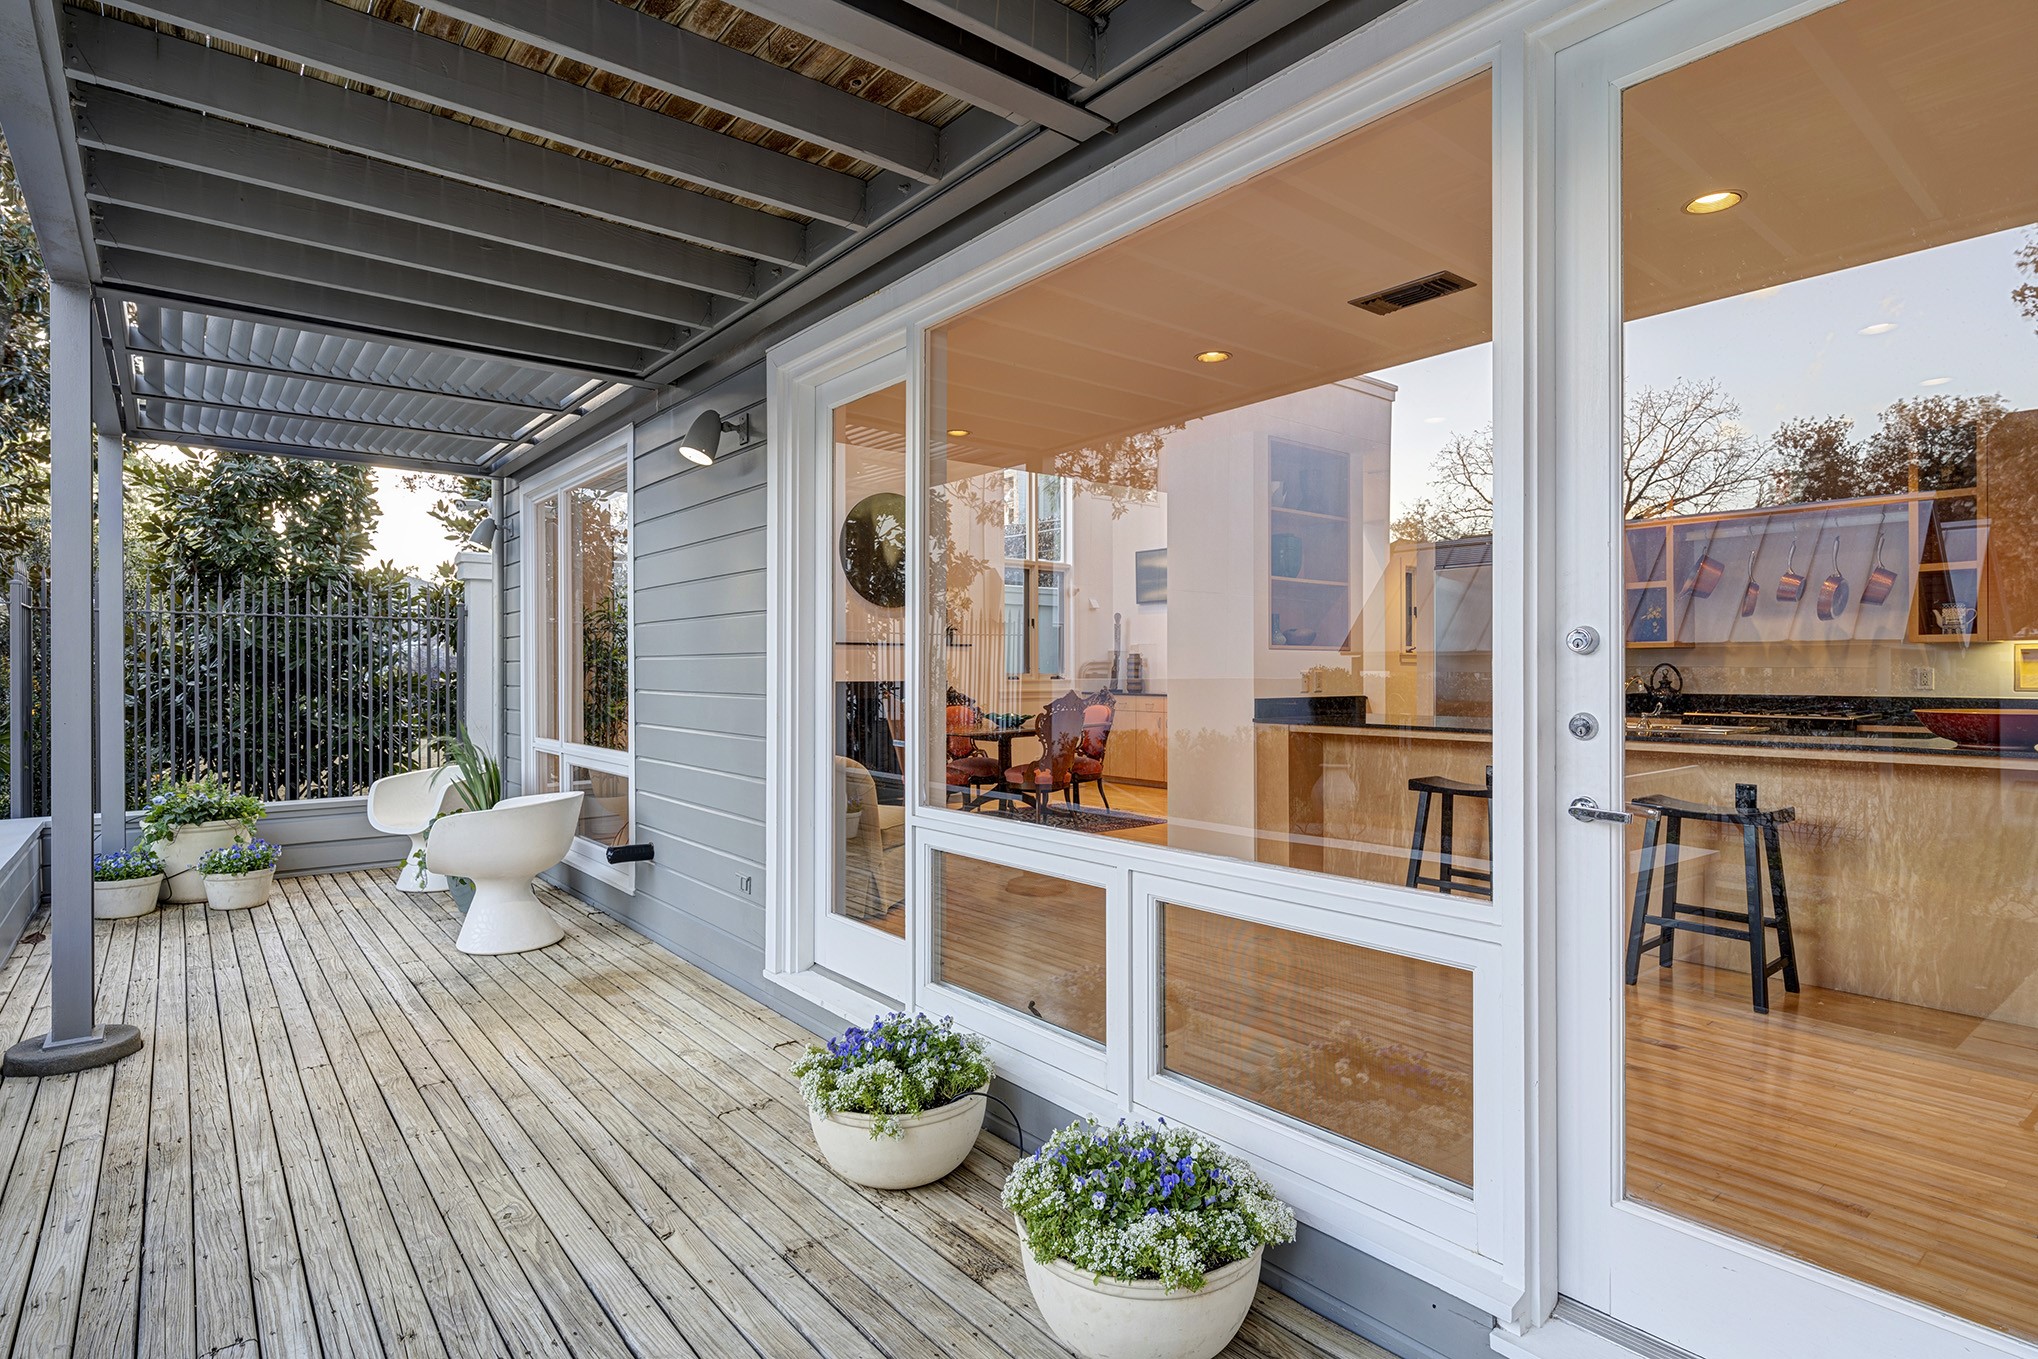 There are 3 porches/decks to enjoy the outdoors.